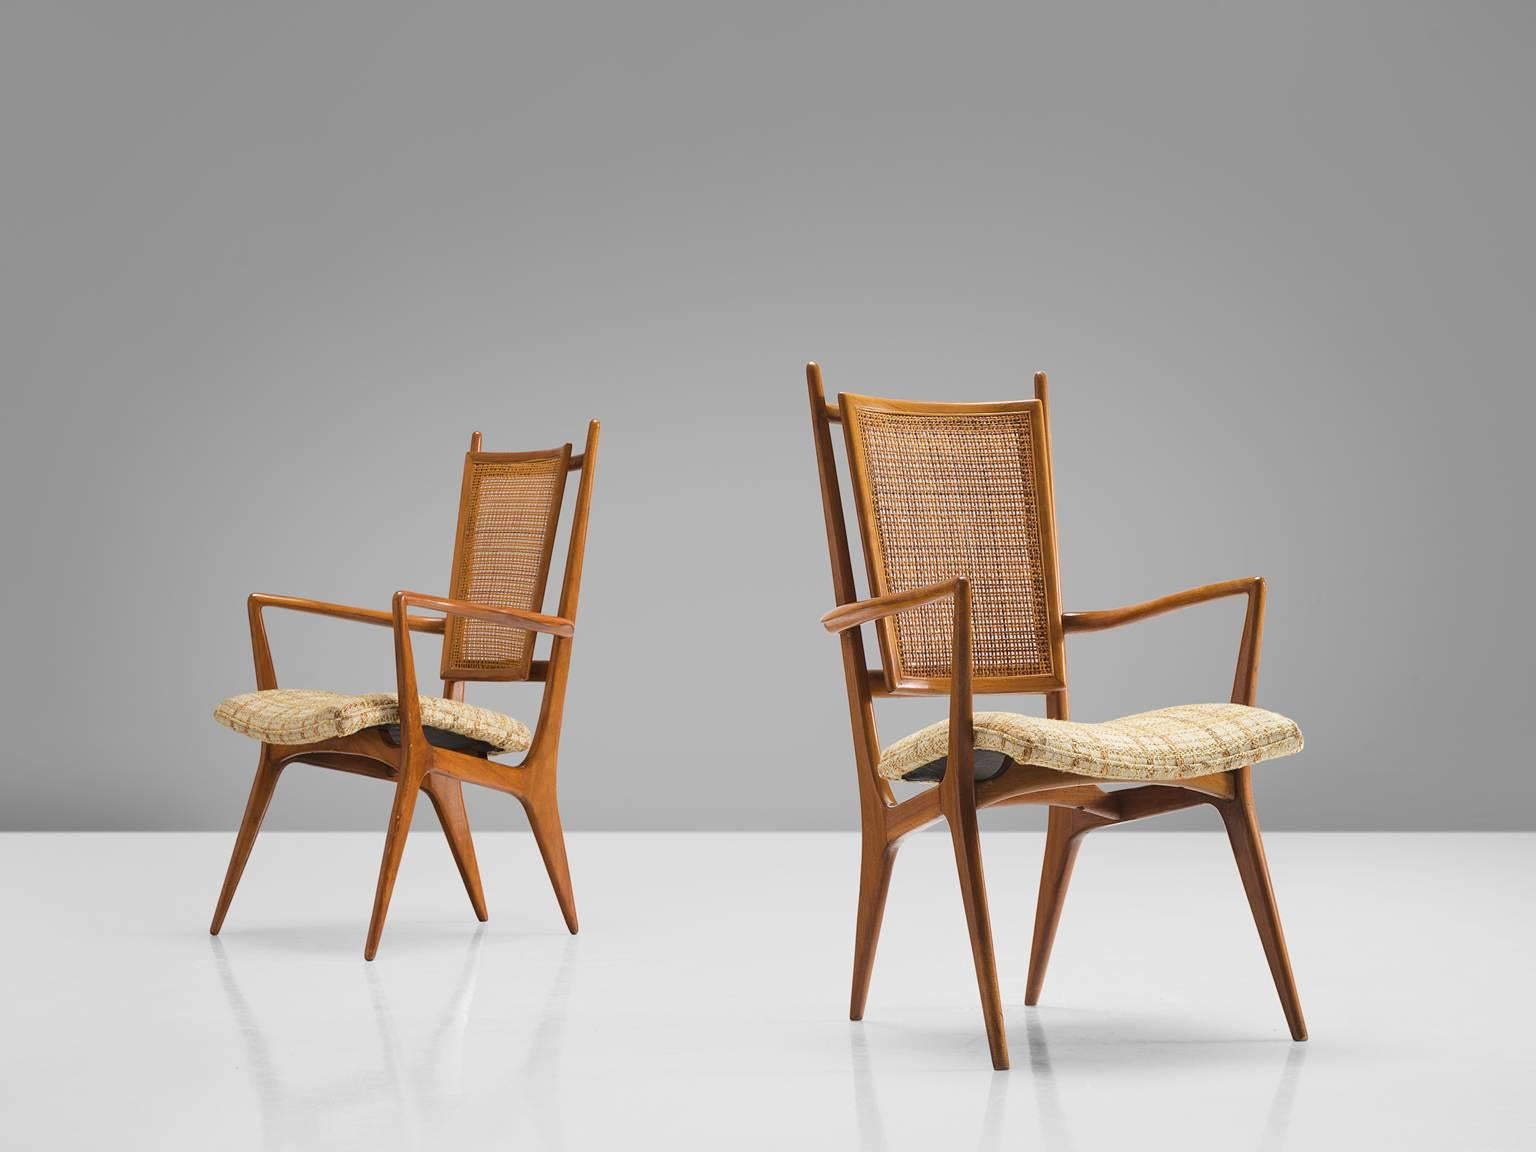 Vladimir Kagan, set of two side chairs, walnut, cane, fabric, United States, circa 1955.

This pair of chairs is designed by Vladimir Kagan for Hugo Dreyfuss. The set of two chairs is sensuous, sculptural and elegant. The chairs feature high backs,